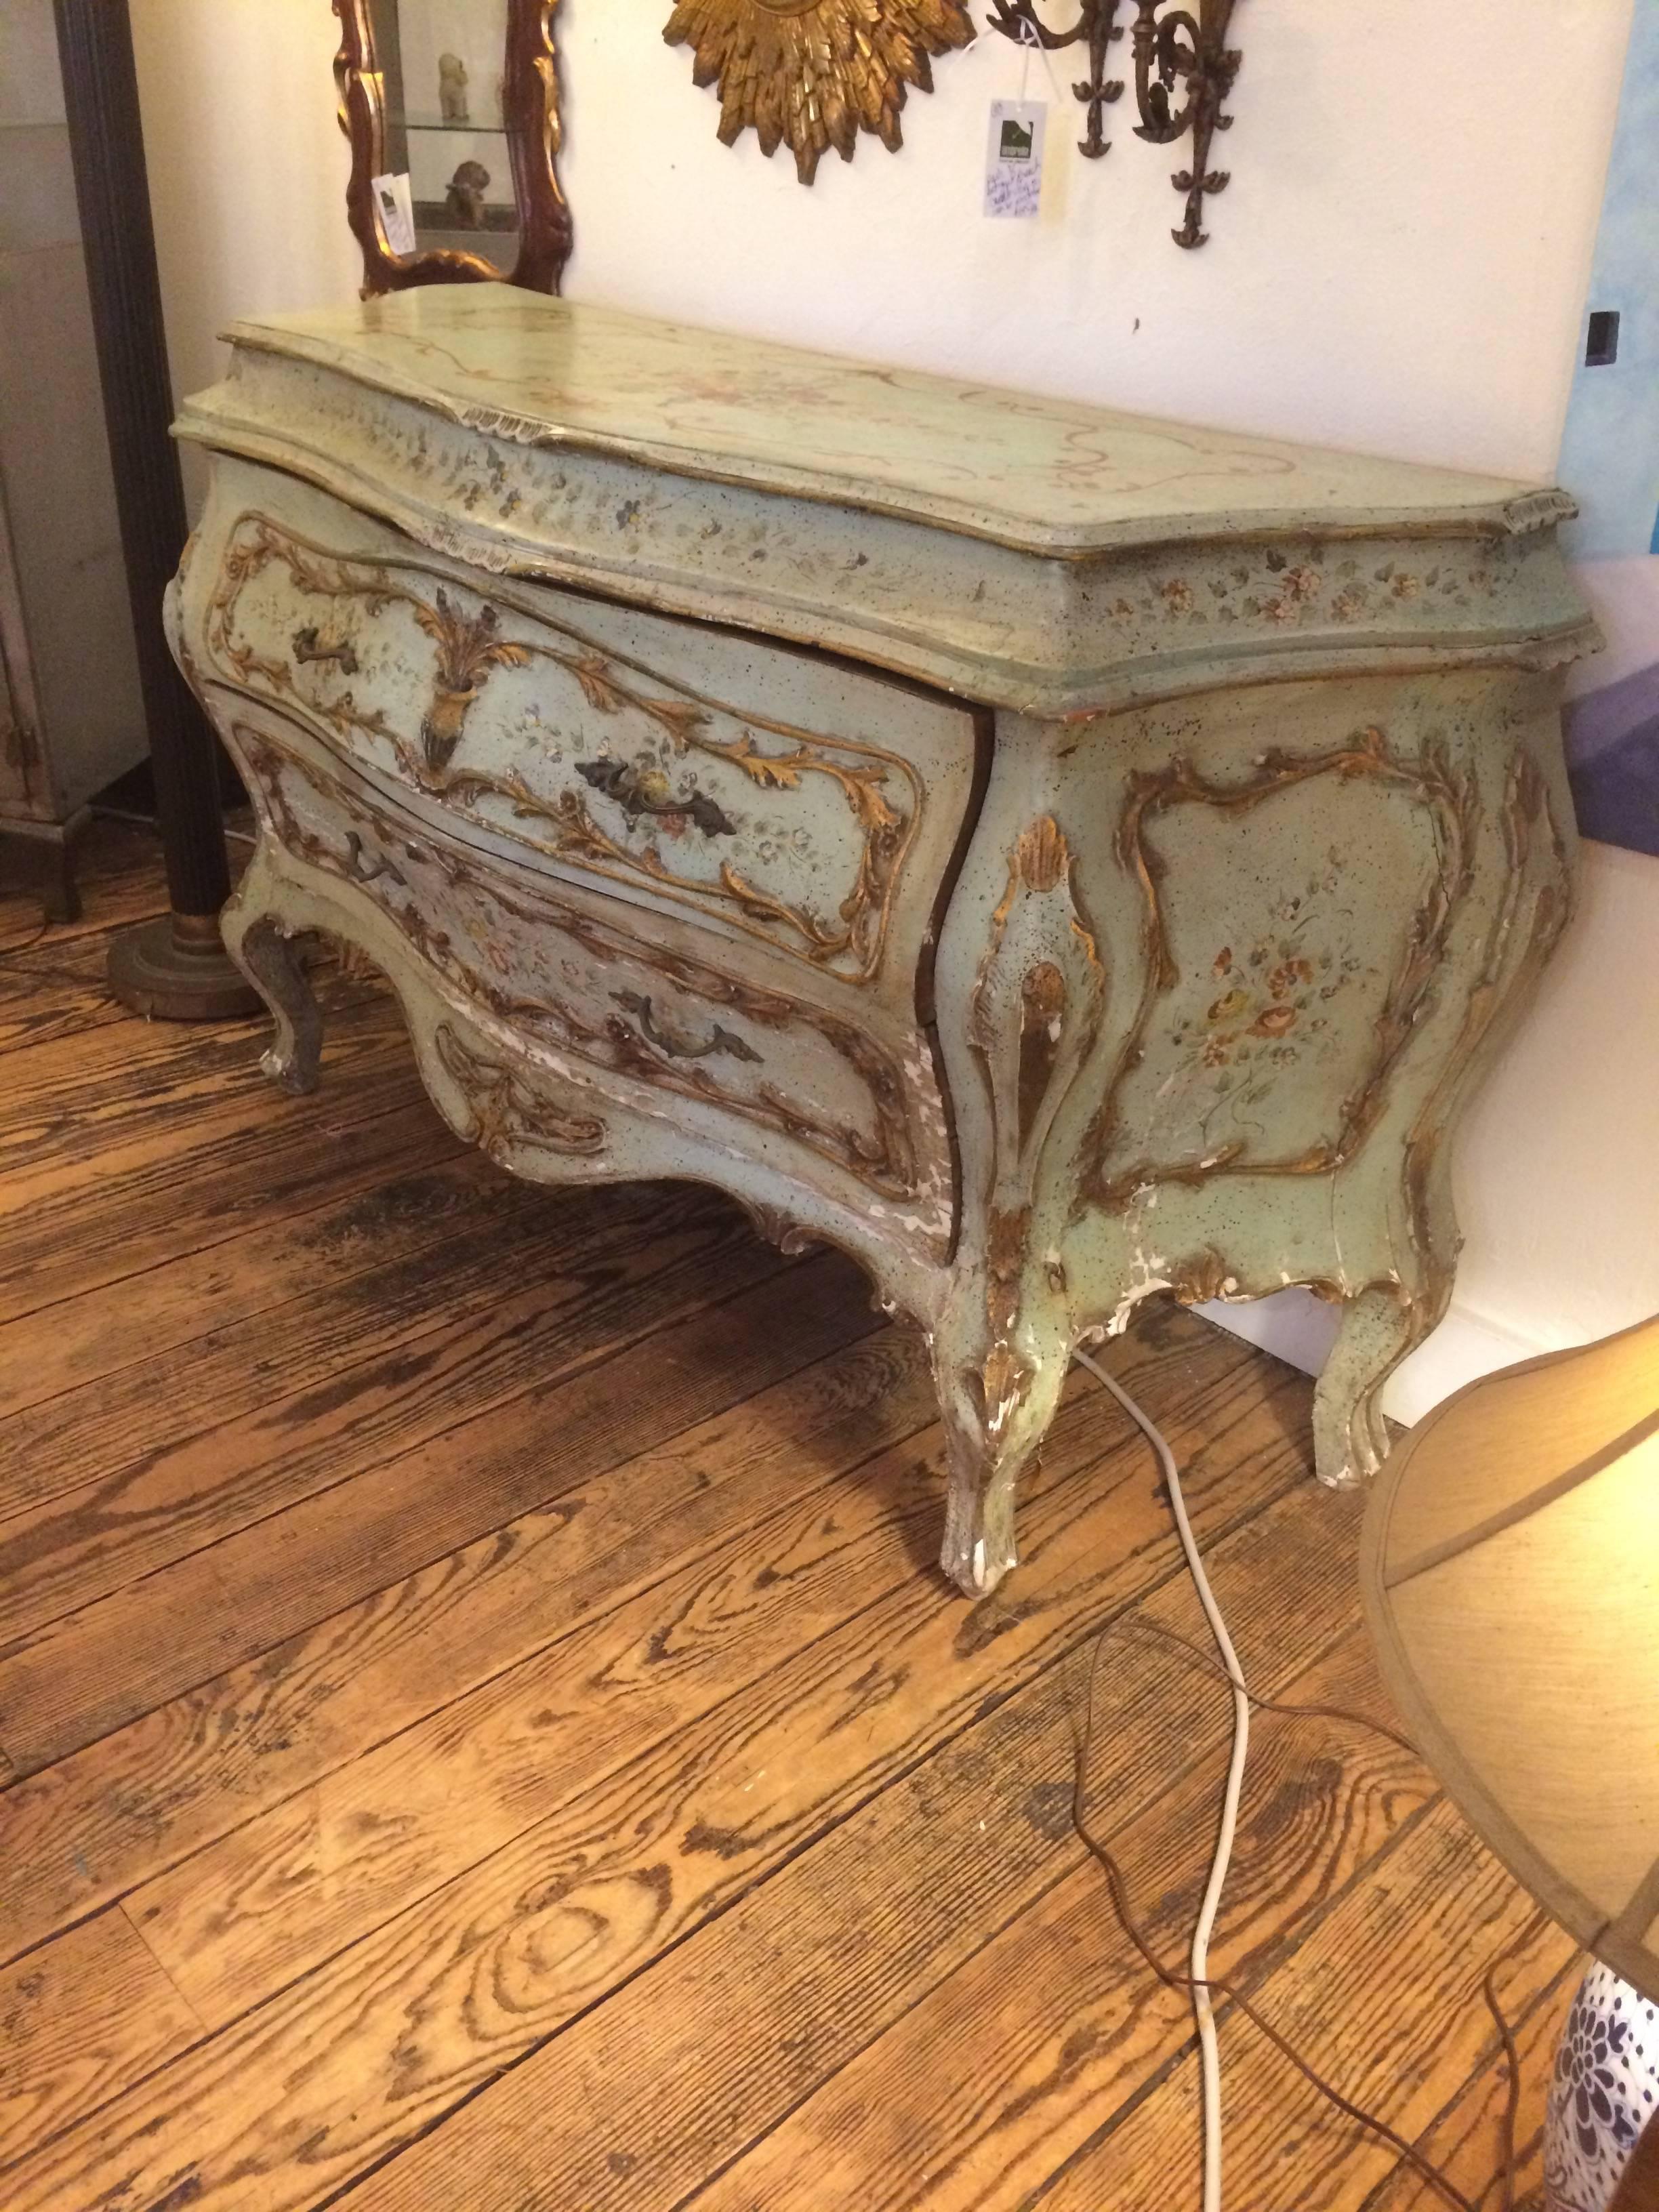 Gorgeous and ornate Rococo bombay shaped commode, hand-painted in a soft celadon with gilt details and pastel flowers, with two large drawers. Original paint that is "chippy" in certain areas. Could be easily restored, but beautiful like